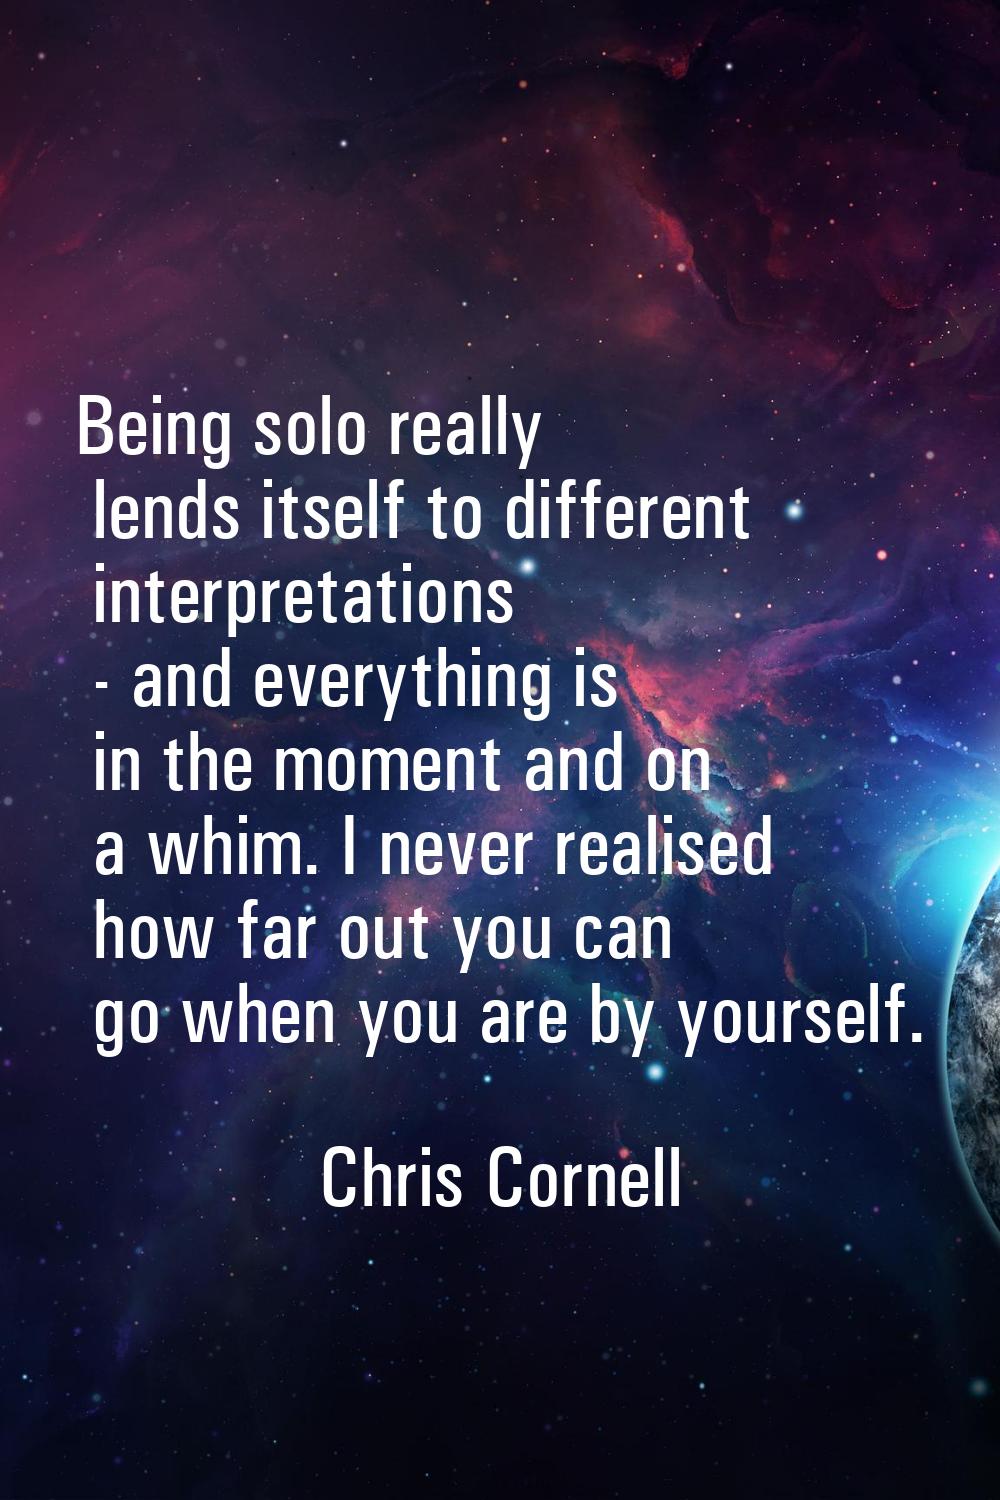 Being solo really lends itself to different interpretations - and everything is in the moment and o